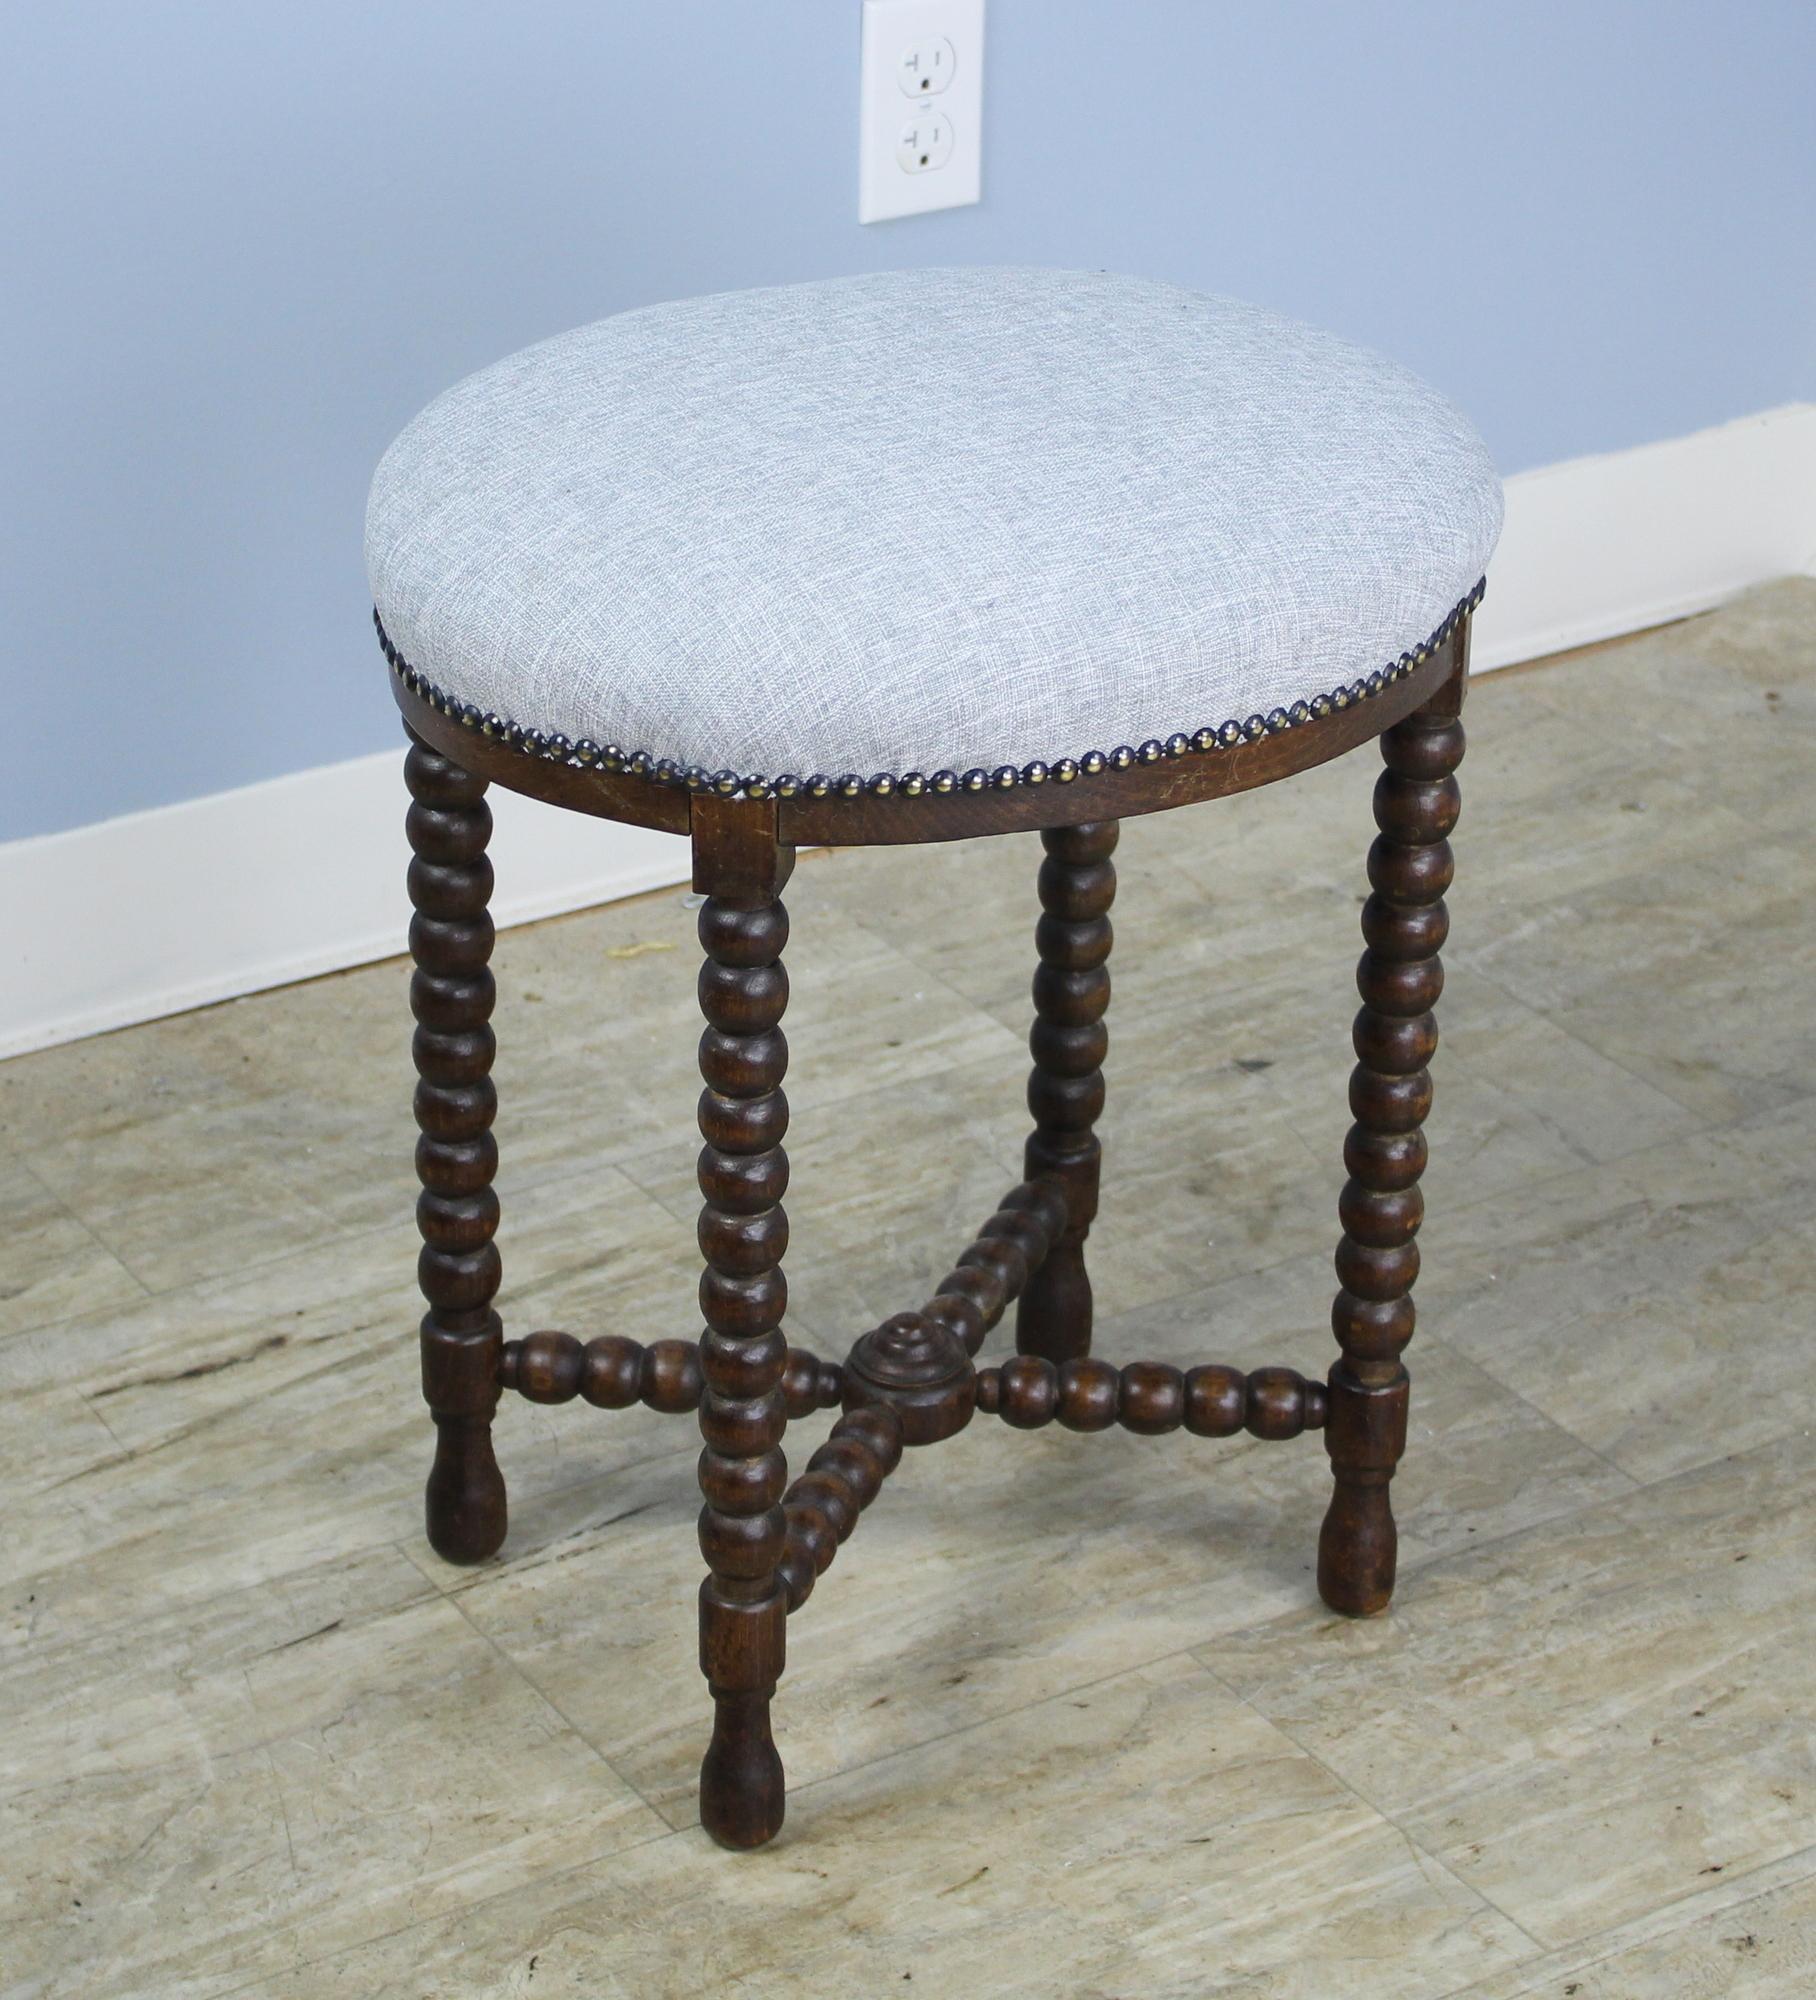 An eye-catching bobbin legged stool, newly upholstered in gray linen. Nice comfortable height provides good extra seating in any room. If you need more than one, take a look at our round stool, similarly upholstered.